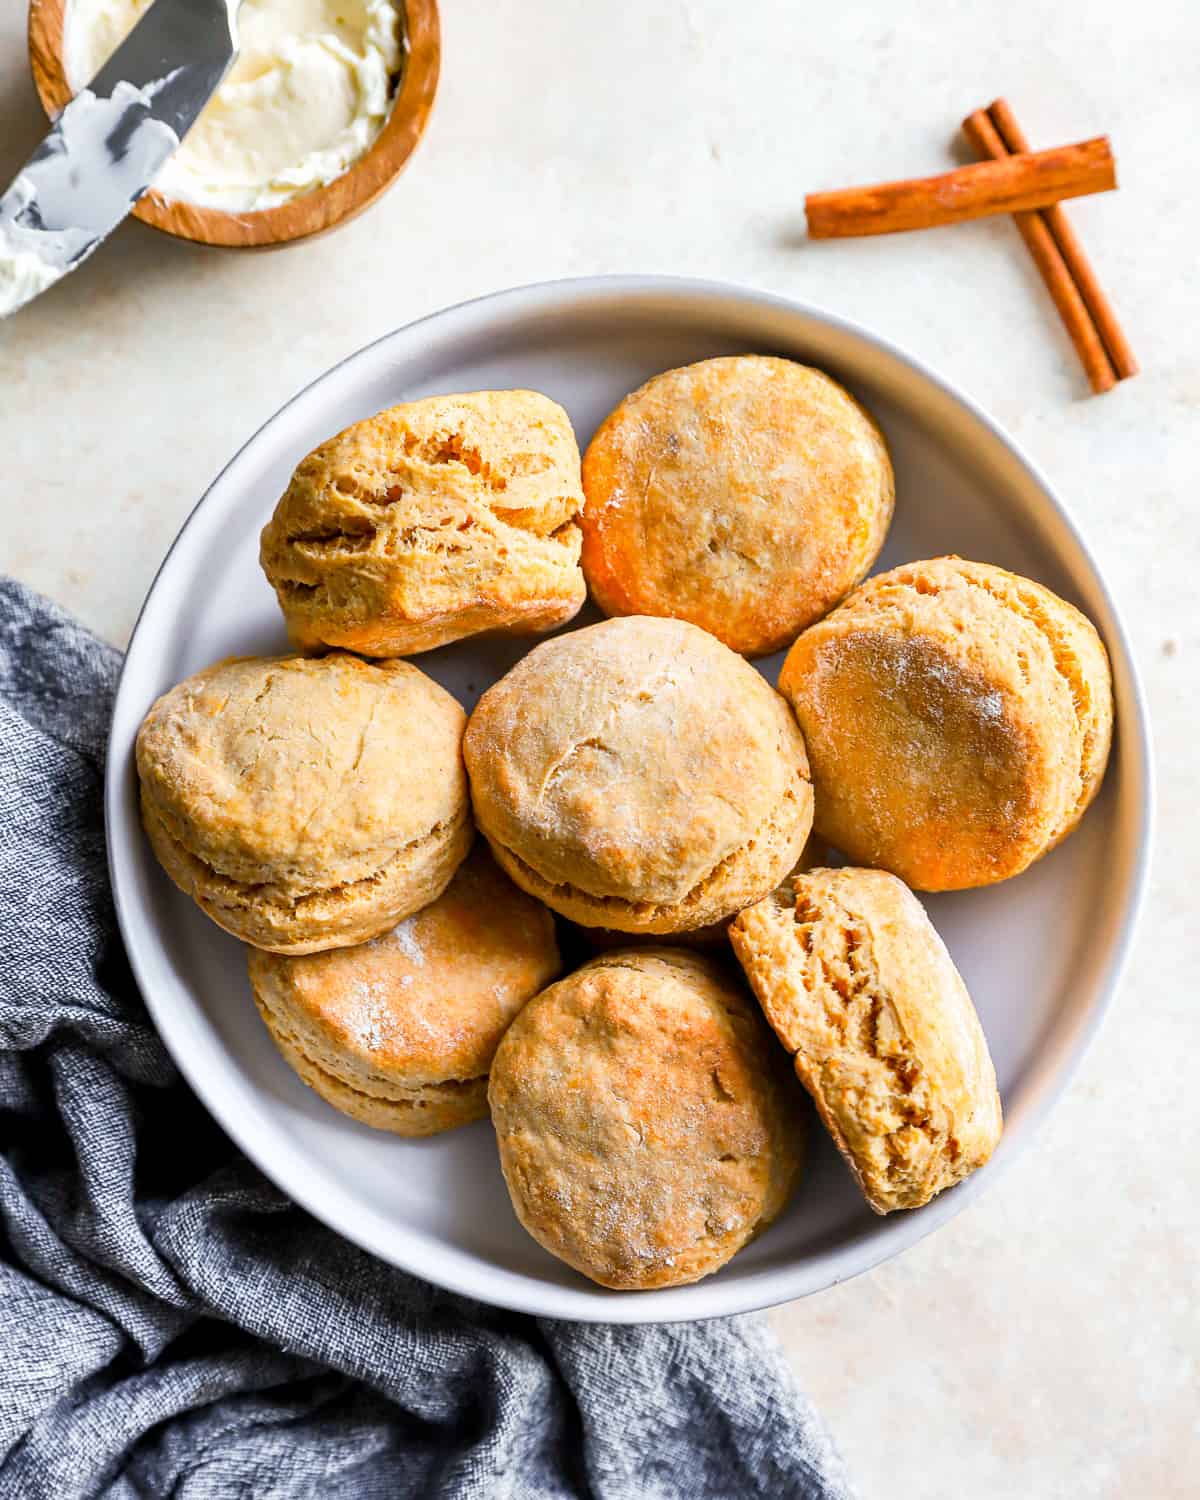 Sweet potato biscuits on a plate, next to cinnamon sticks.